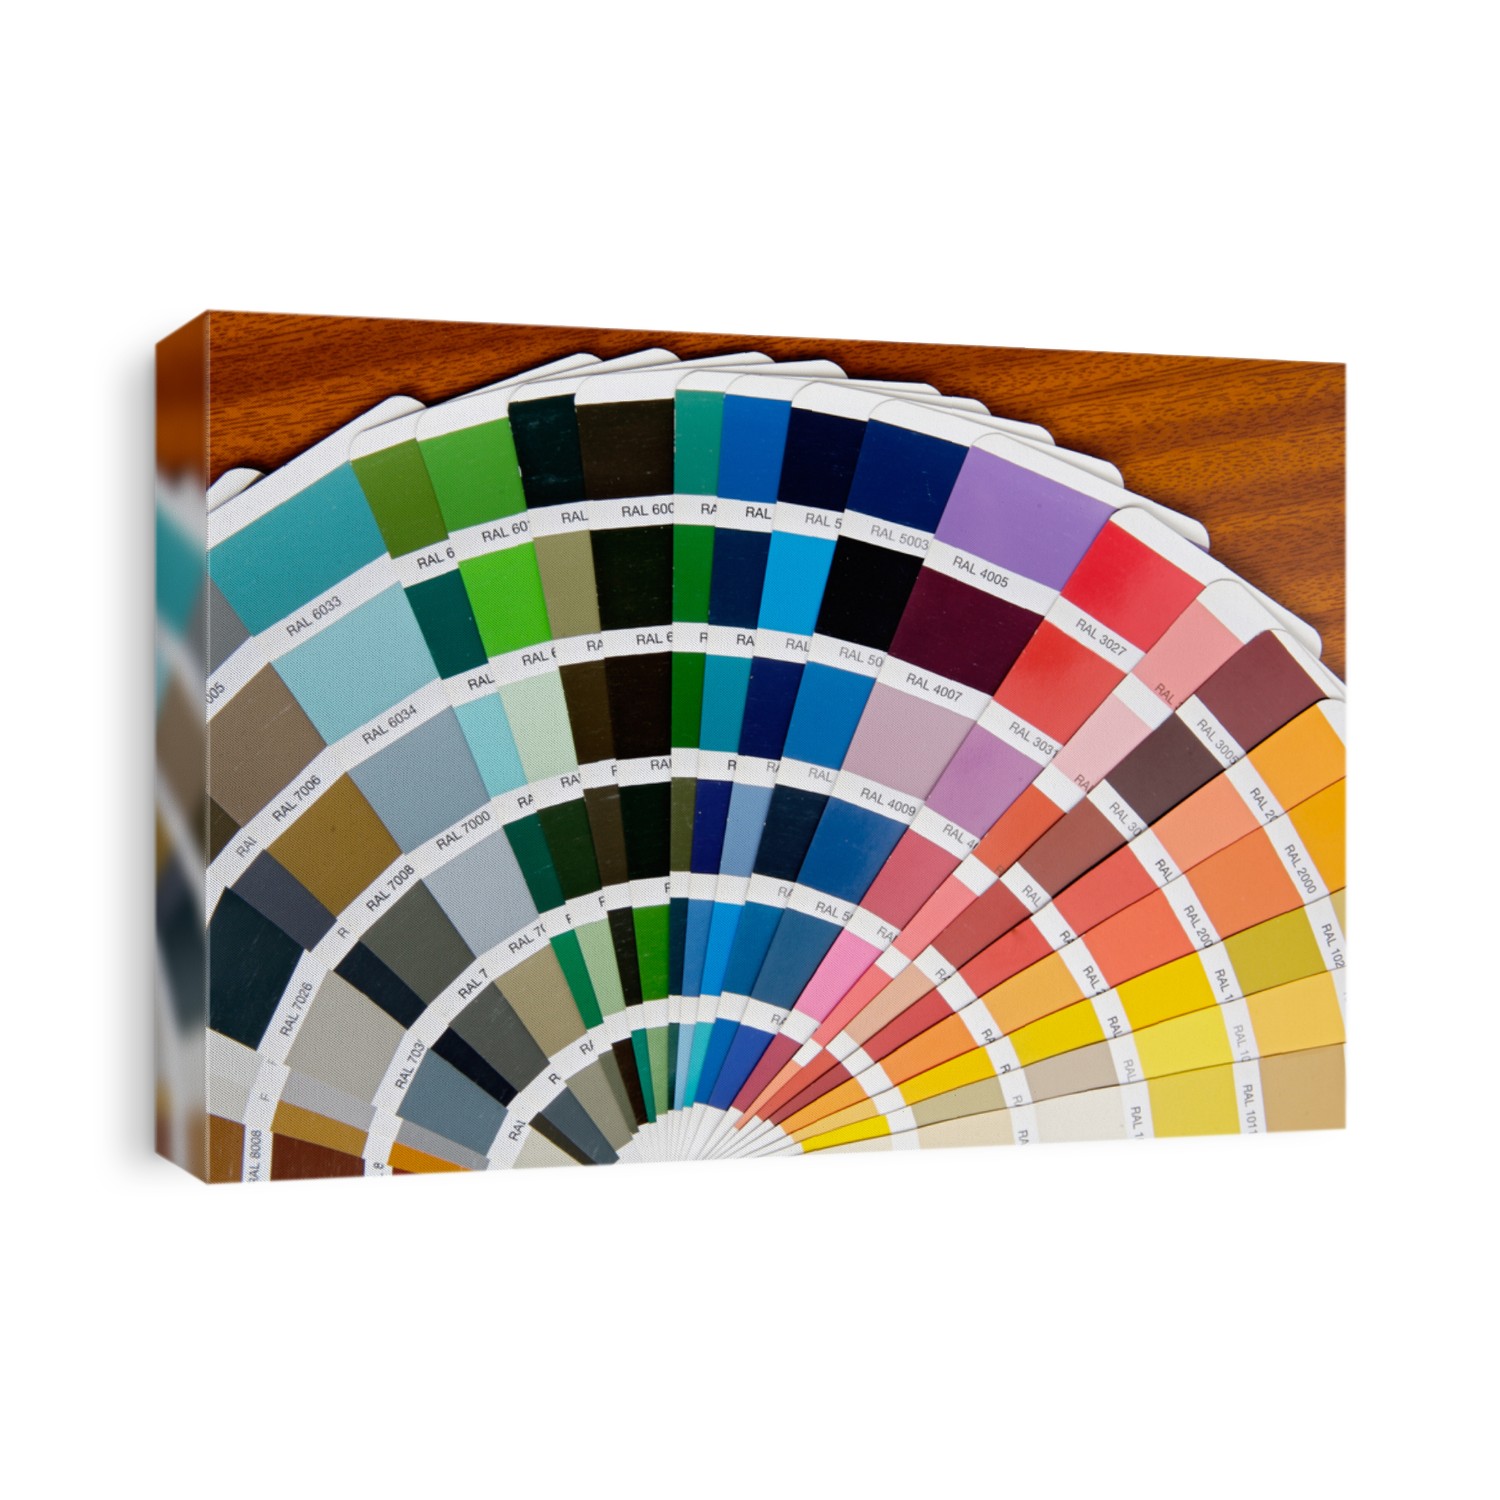 a photo of a fan of colors in the table